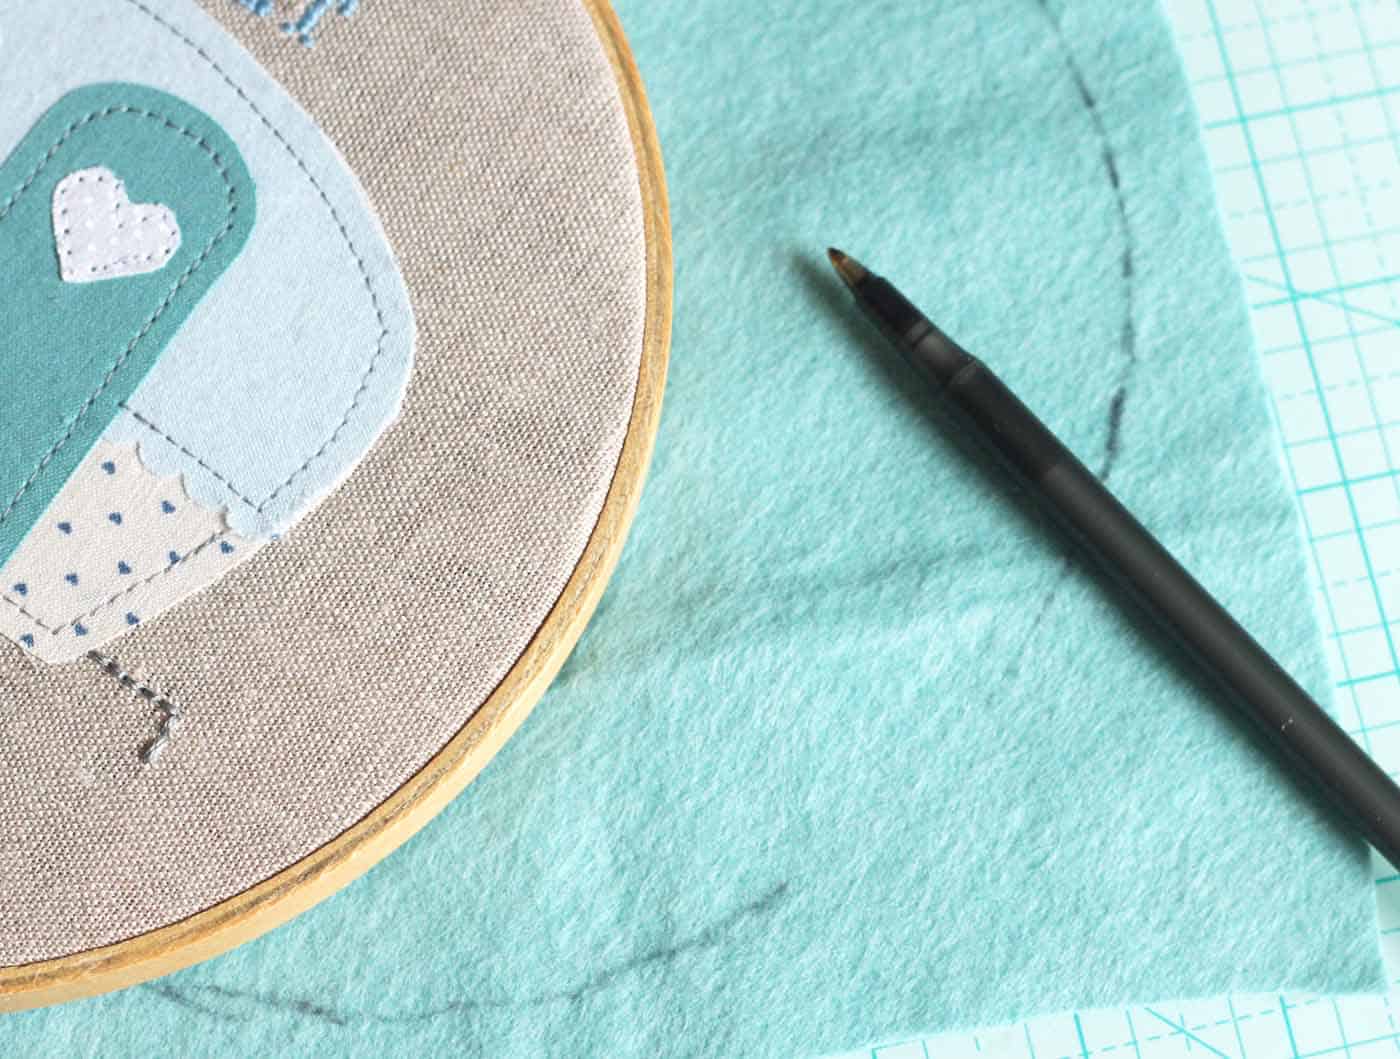 Tracing a circle of blue felt with an embroidery hoop